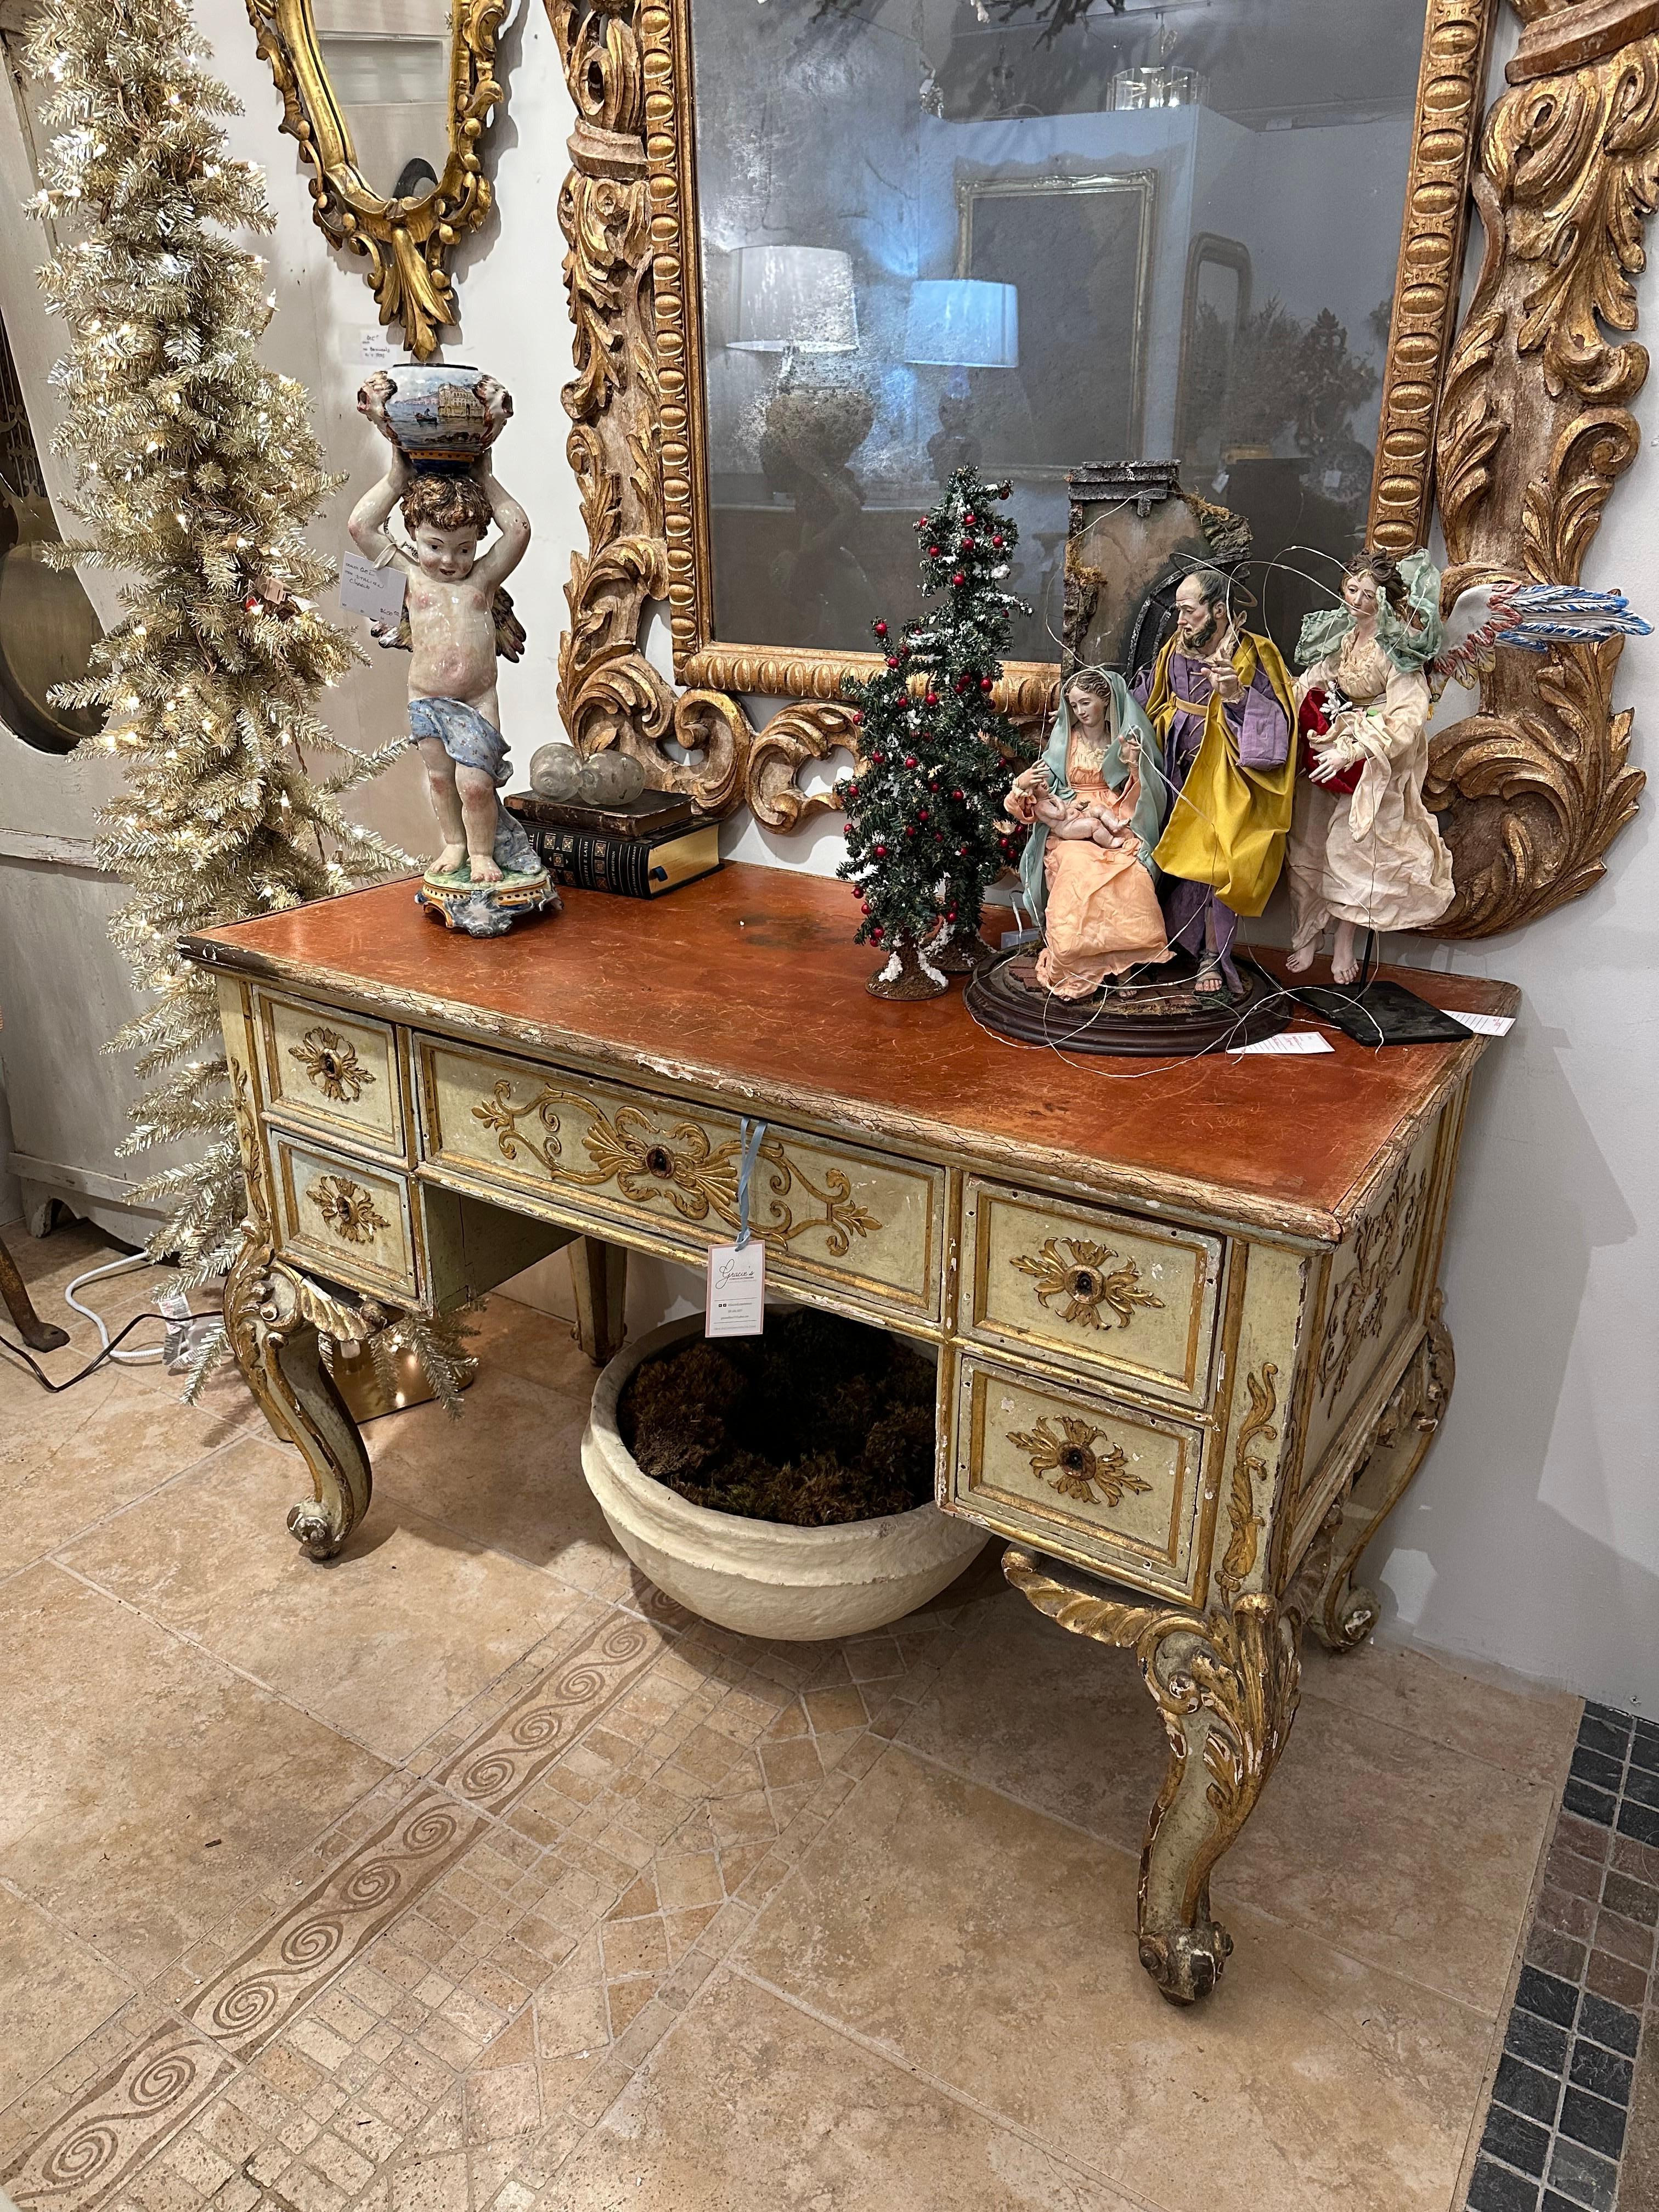 The 18th Century French Boulle Louis XVI Style Mazarin exudes timeless elegance and exquisite craftsmanship. Adorned with intricate detailing characteristic of the Boulle style, this desk stands as a testament to the opulence of the Louis XVI era.